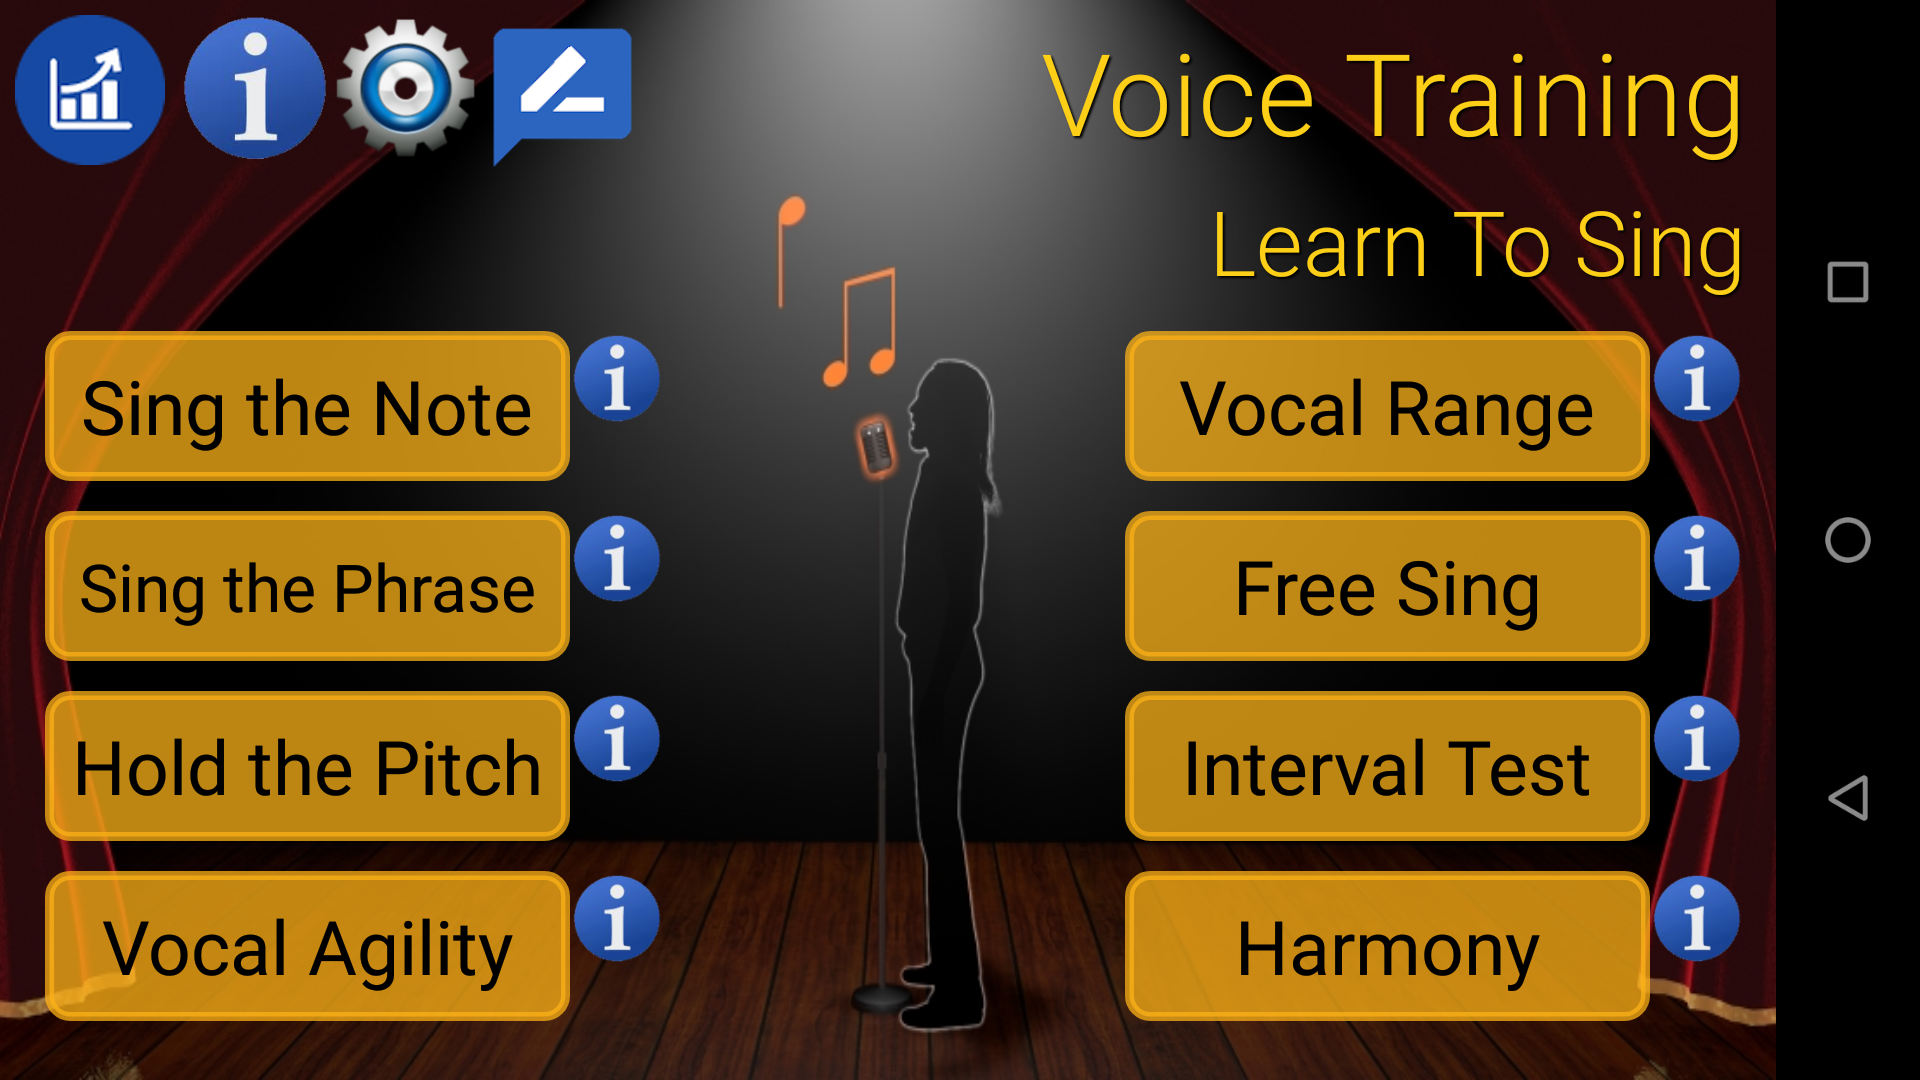 Voice Training – Learn To Sing